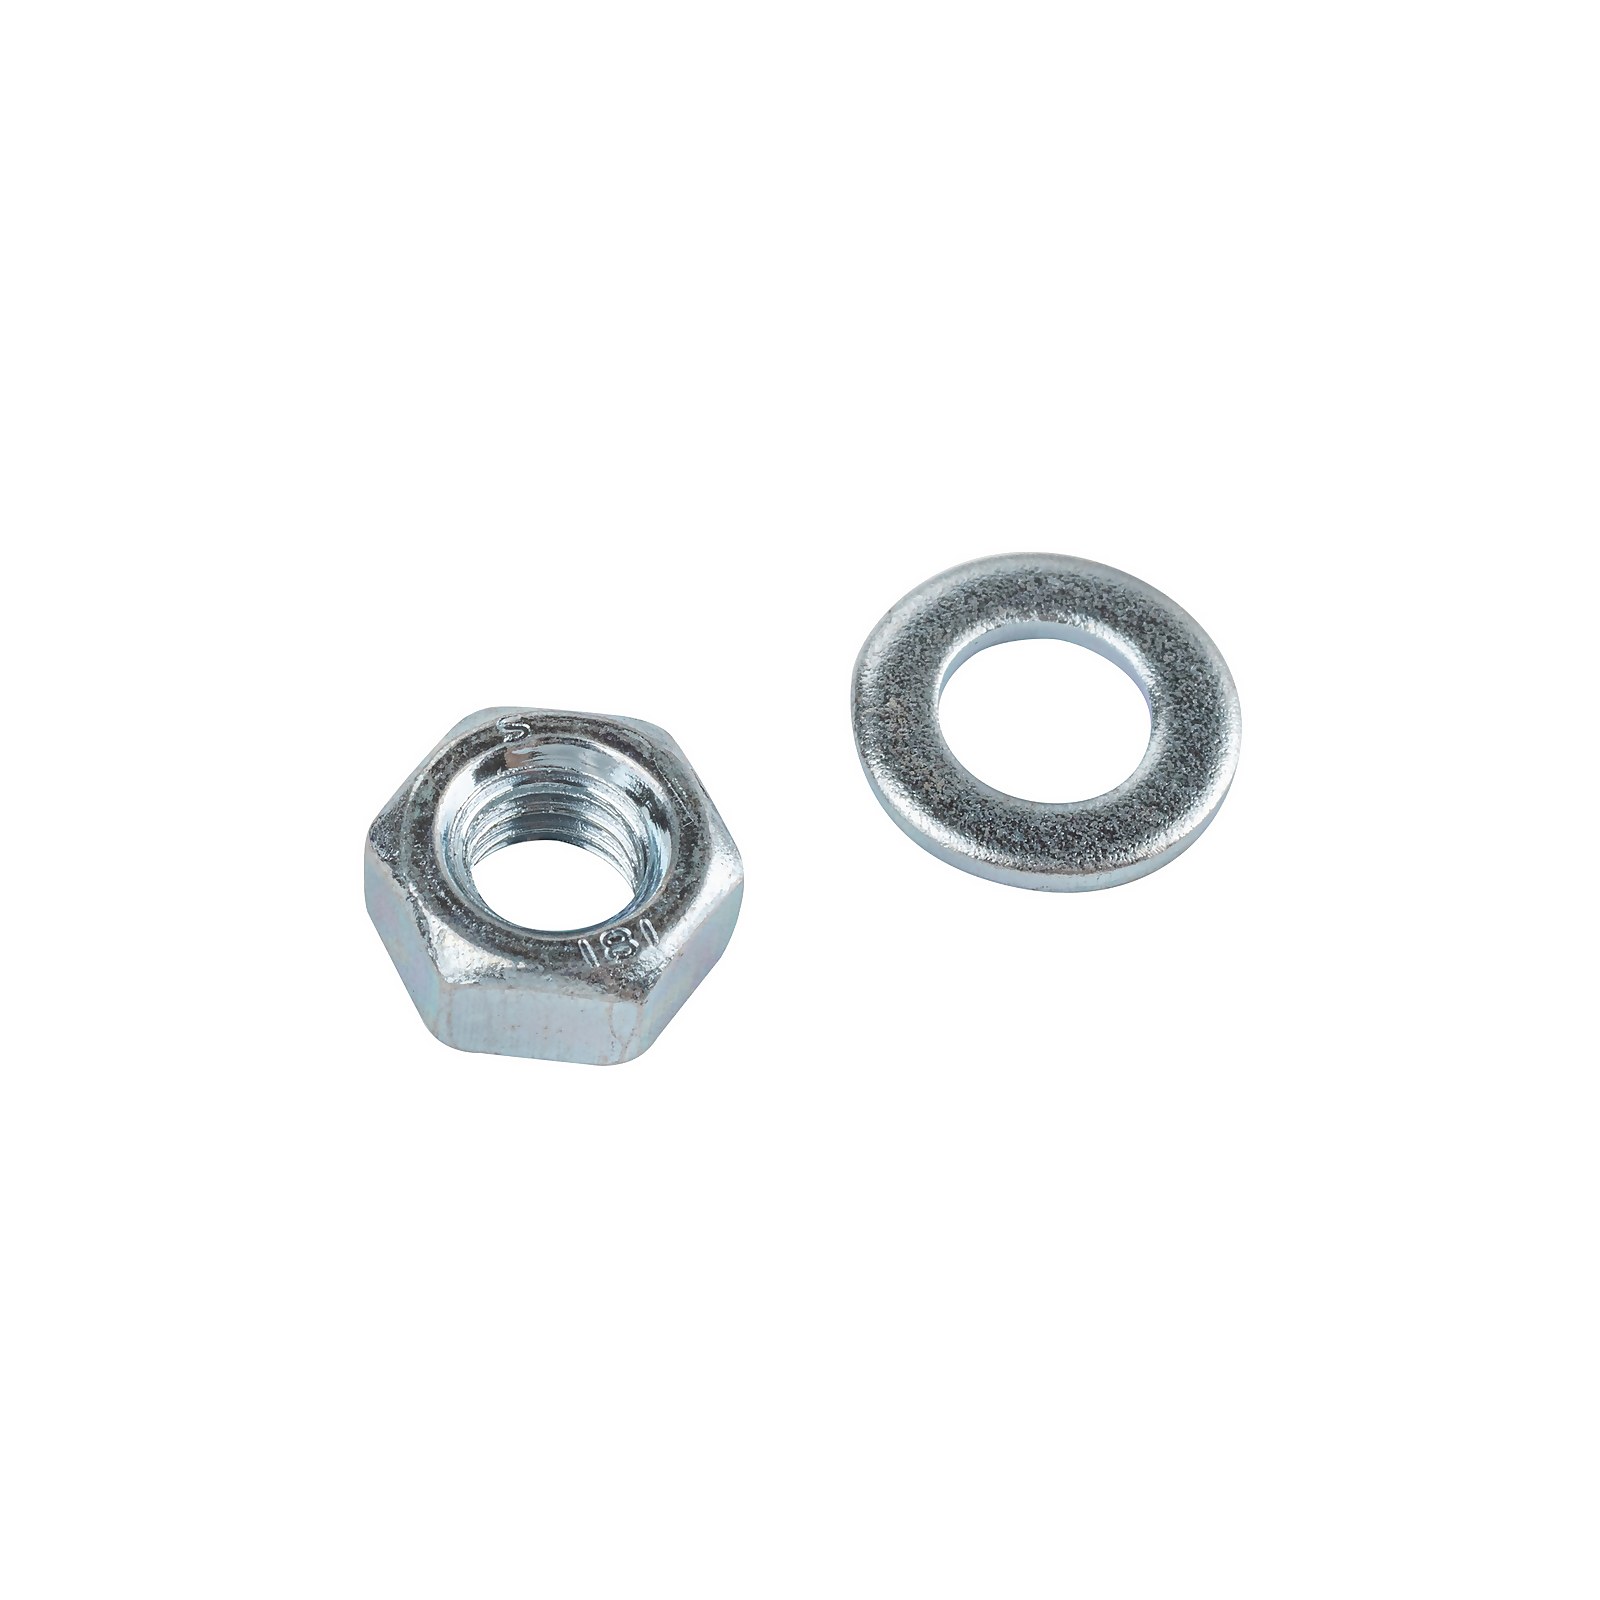 Photo of Homebase Zinc Plated Hex Nut & Washer M10 5 Pack